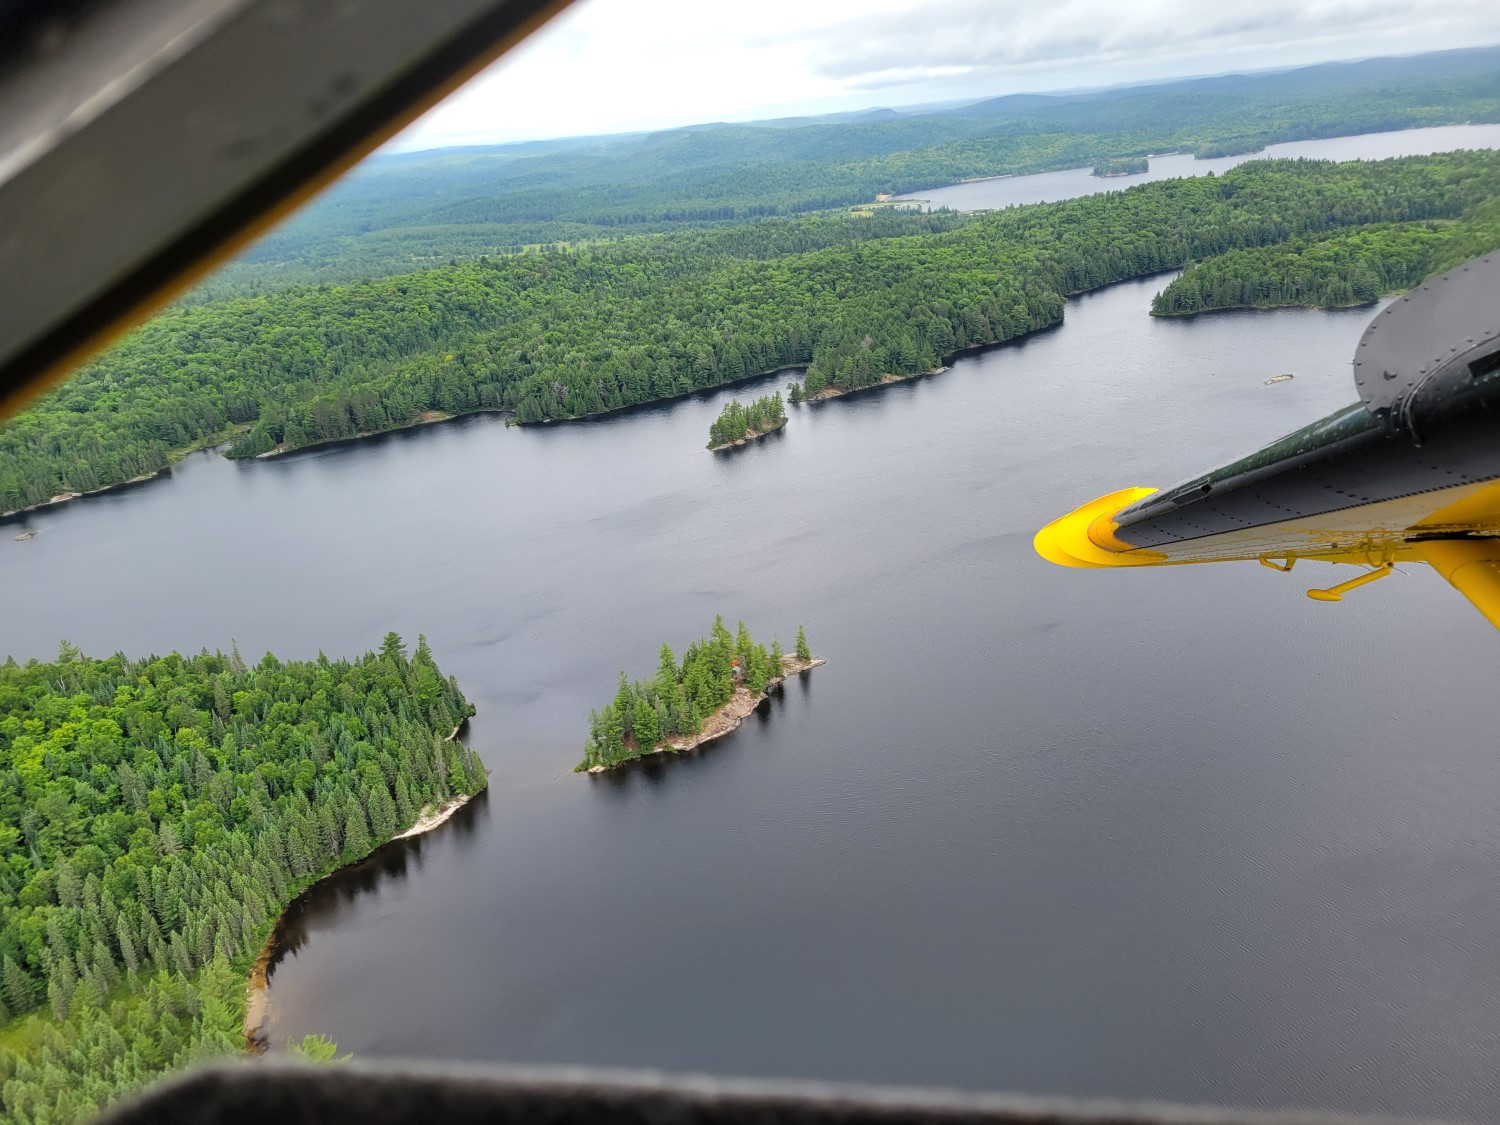 The view from the window of a small plane, overlooking the backcountry of Algonquin: a body of water broken up wit large and small islands, all covered with dense forest.